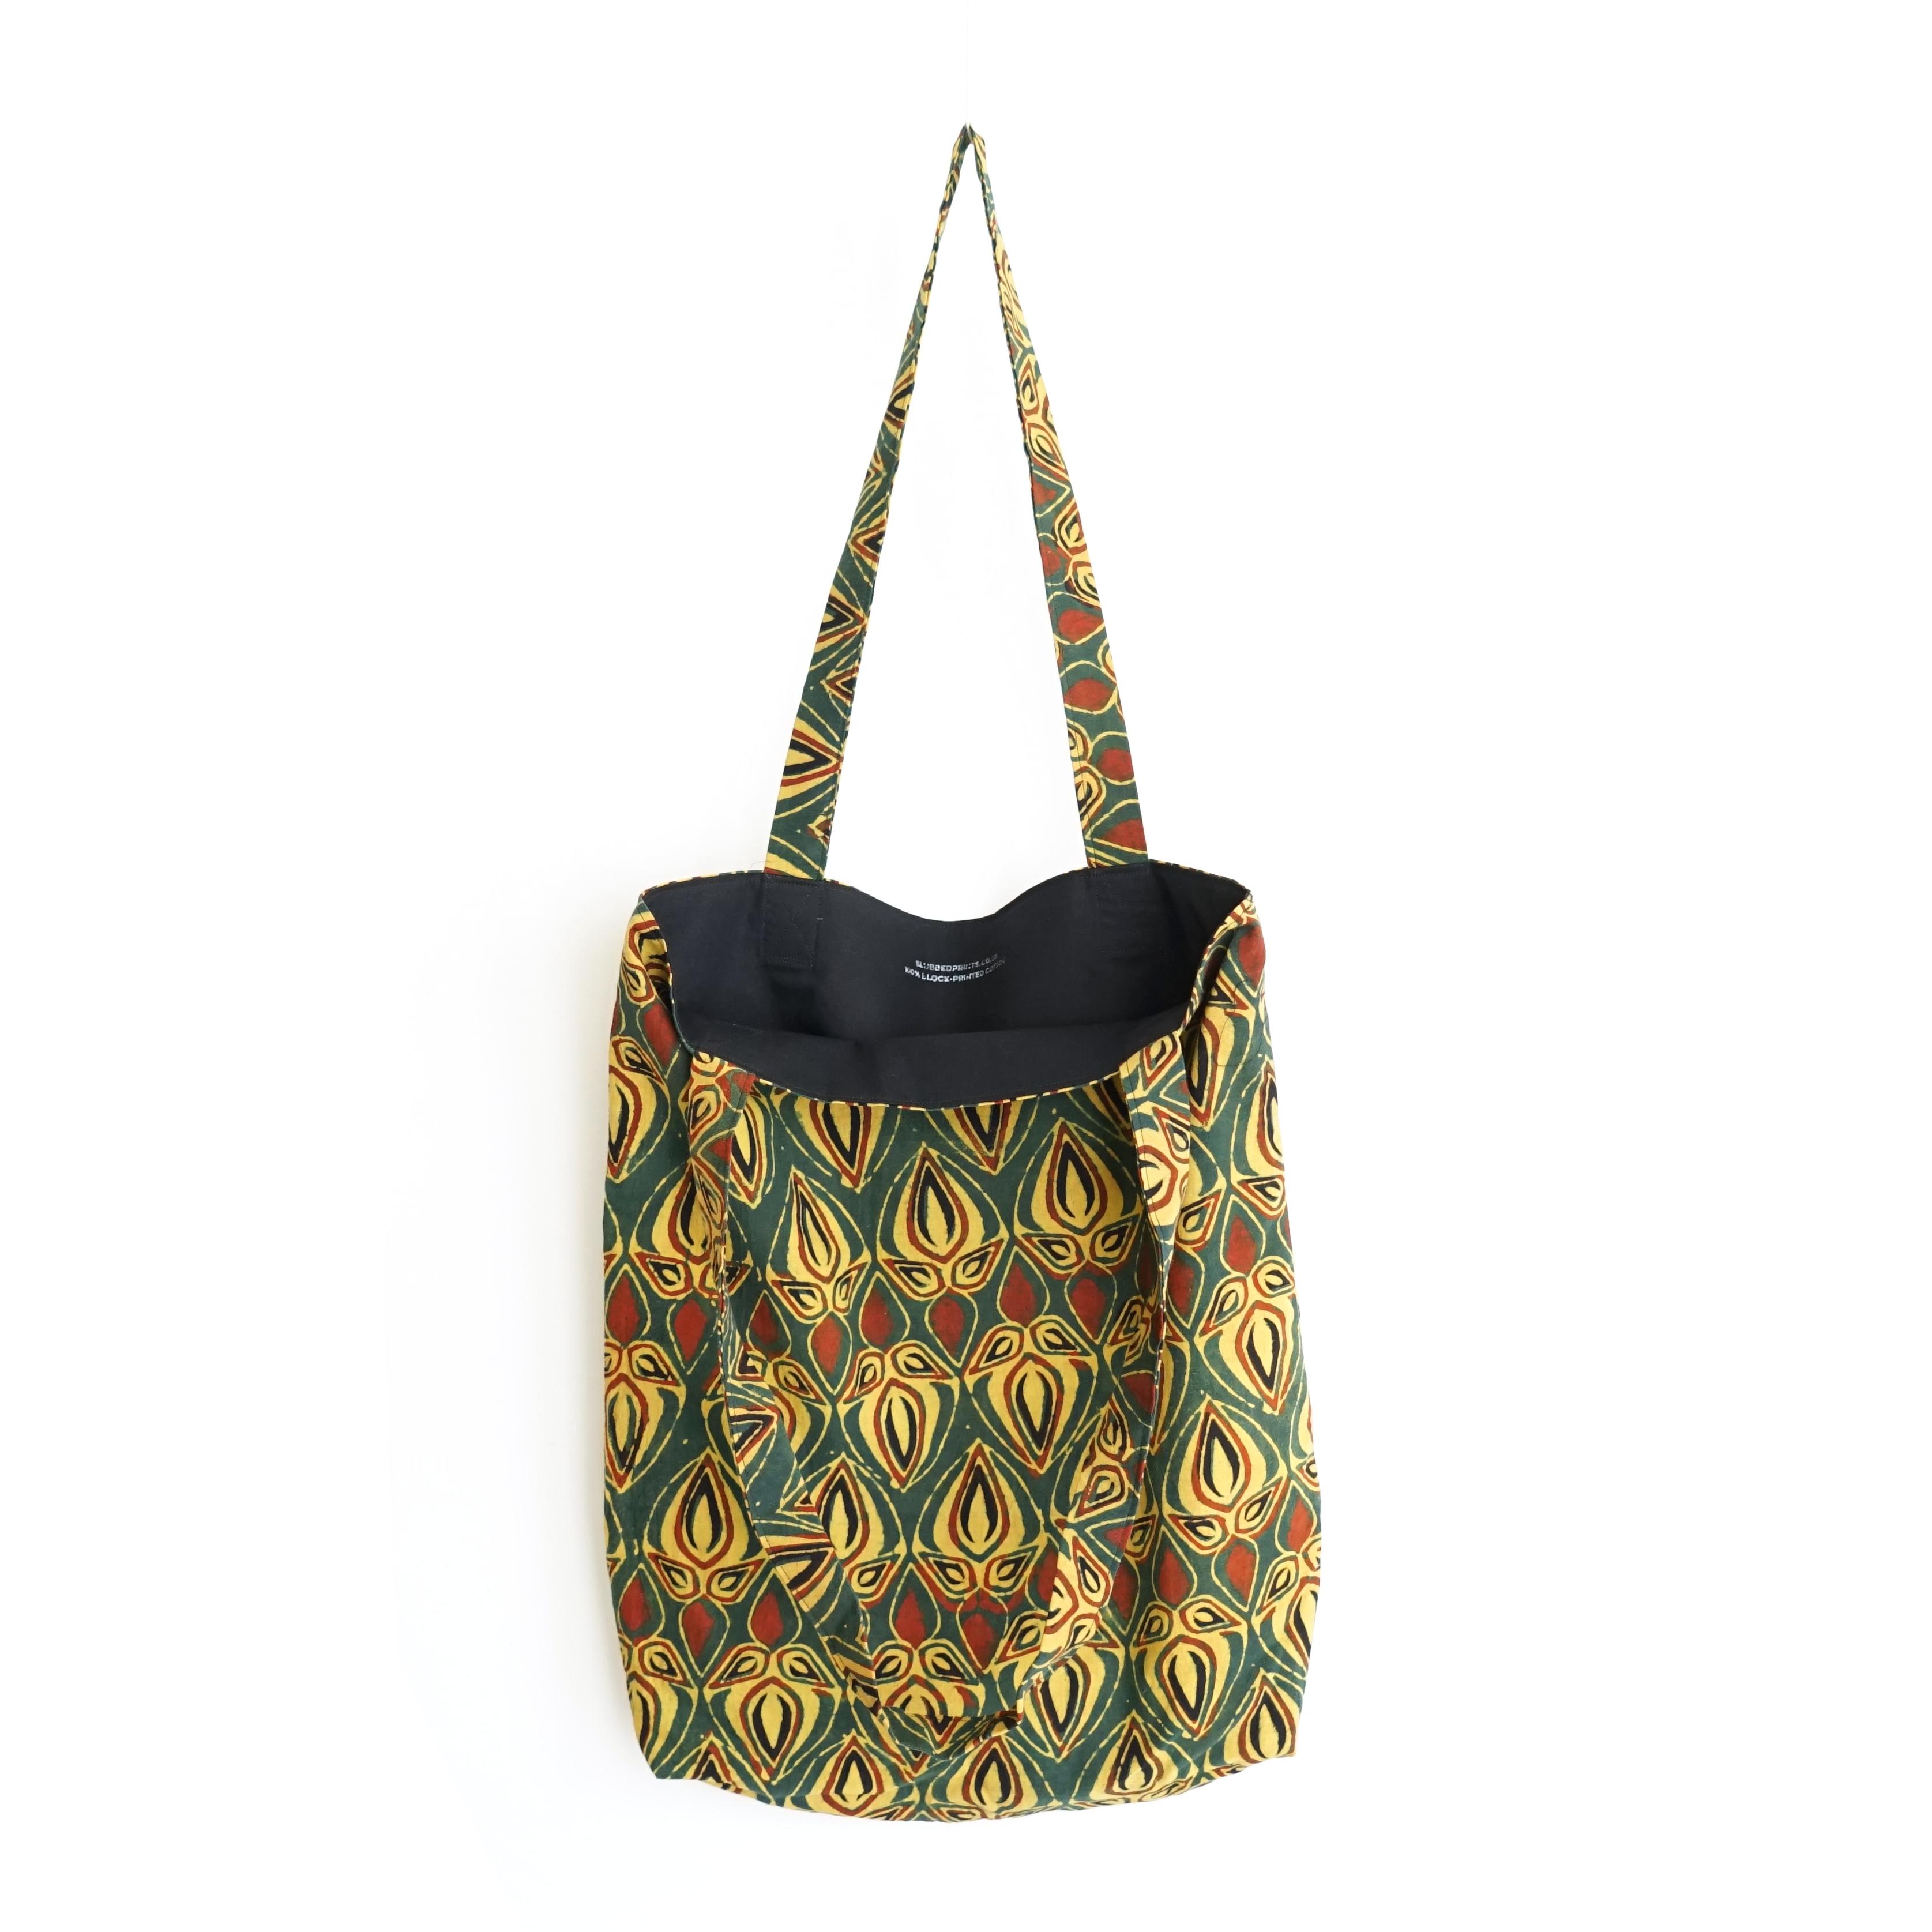 block printed cotton tote bag, green, yellow red bud, natural dye, lined with black cotton, open